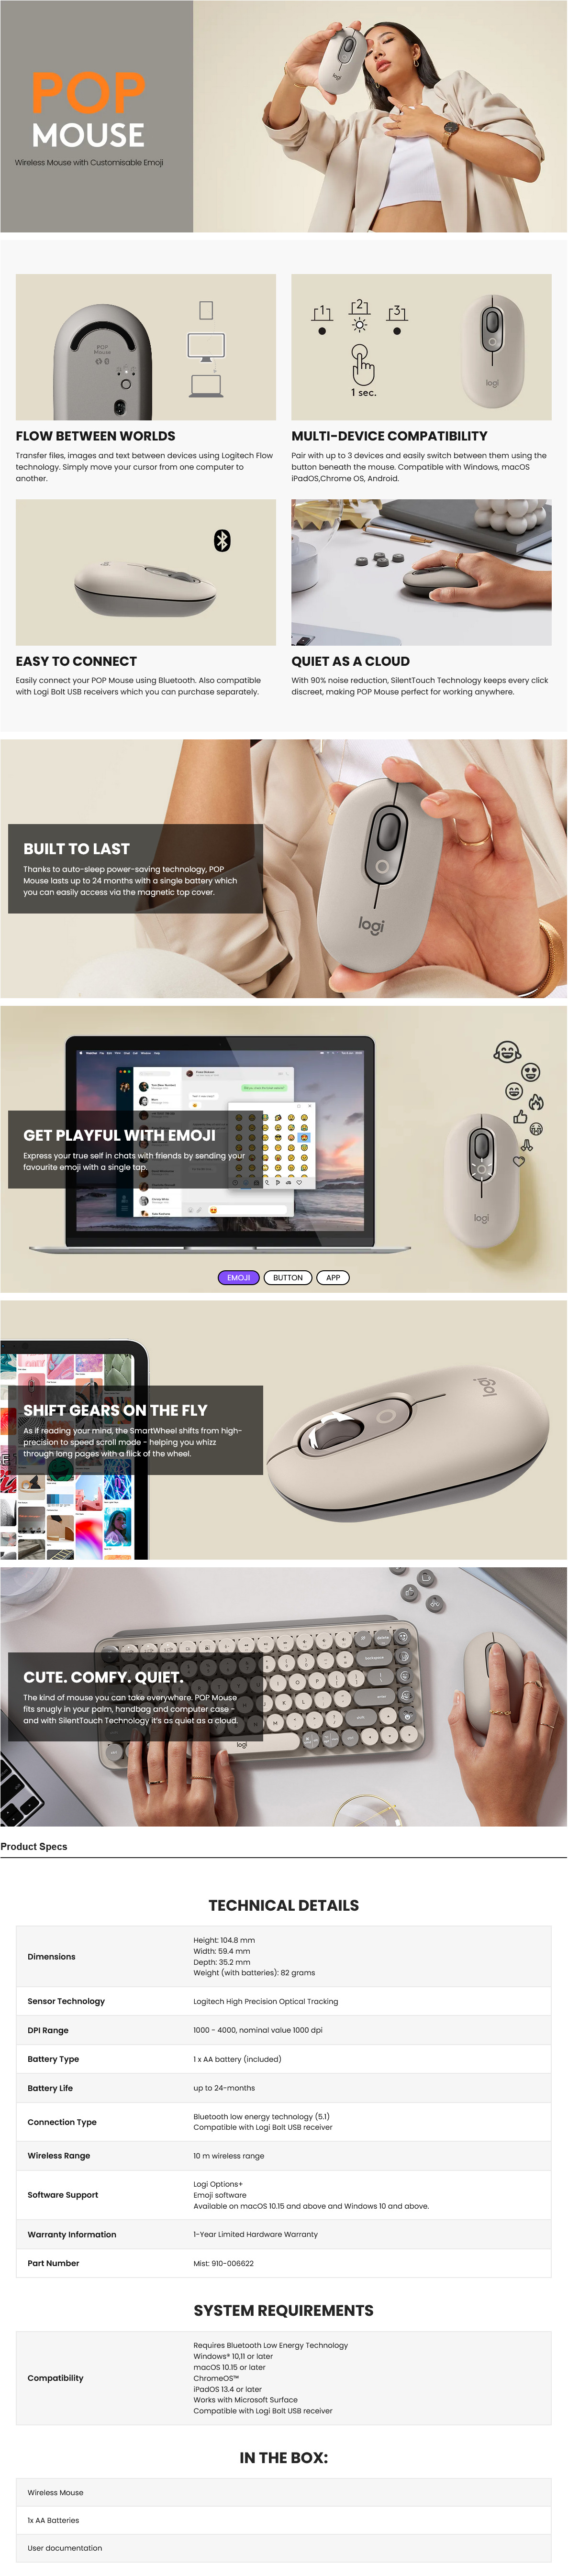 A large marketing image providing additional information about the product Logitech POP Wireless Mouse - Mist Sand - Additional alt info not provided